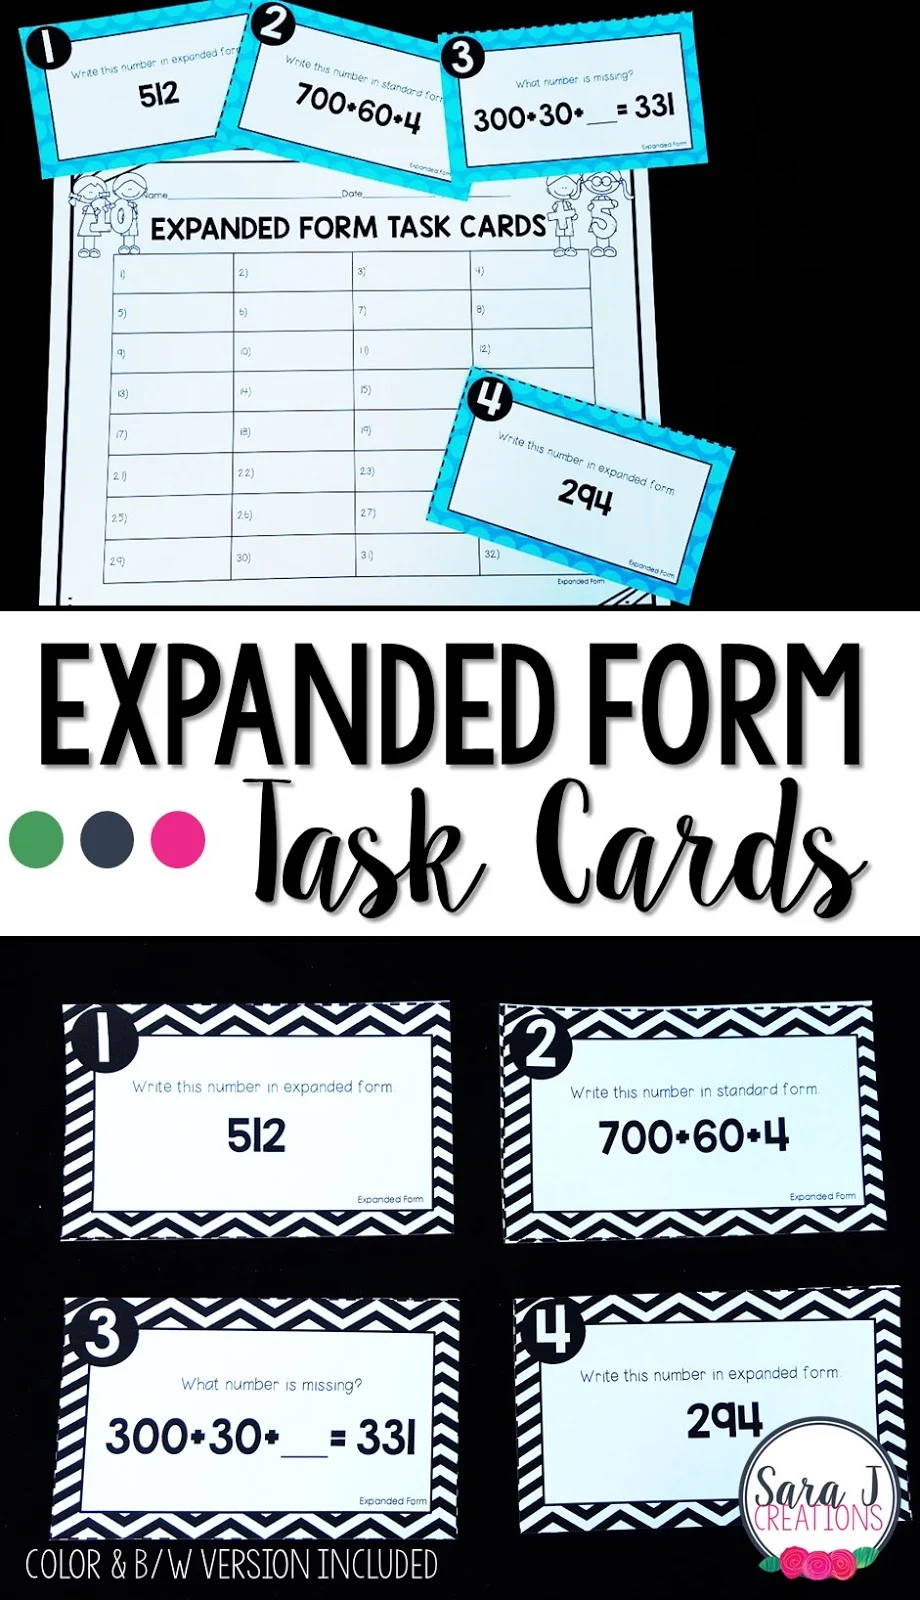 Expanded form task cards - a practicing place value activity